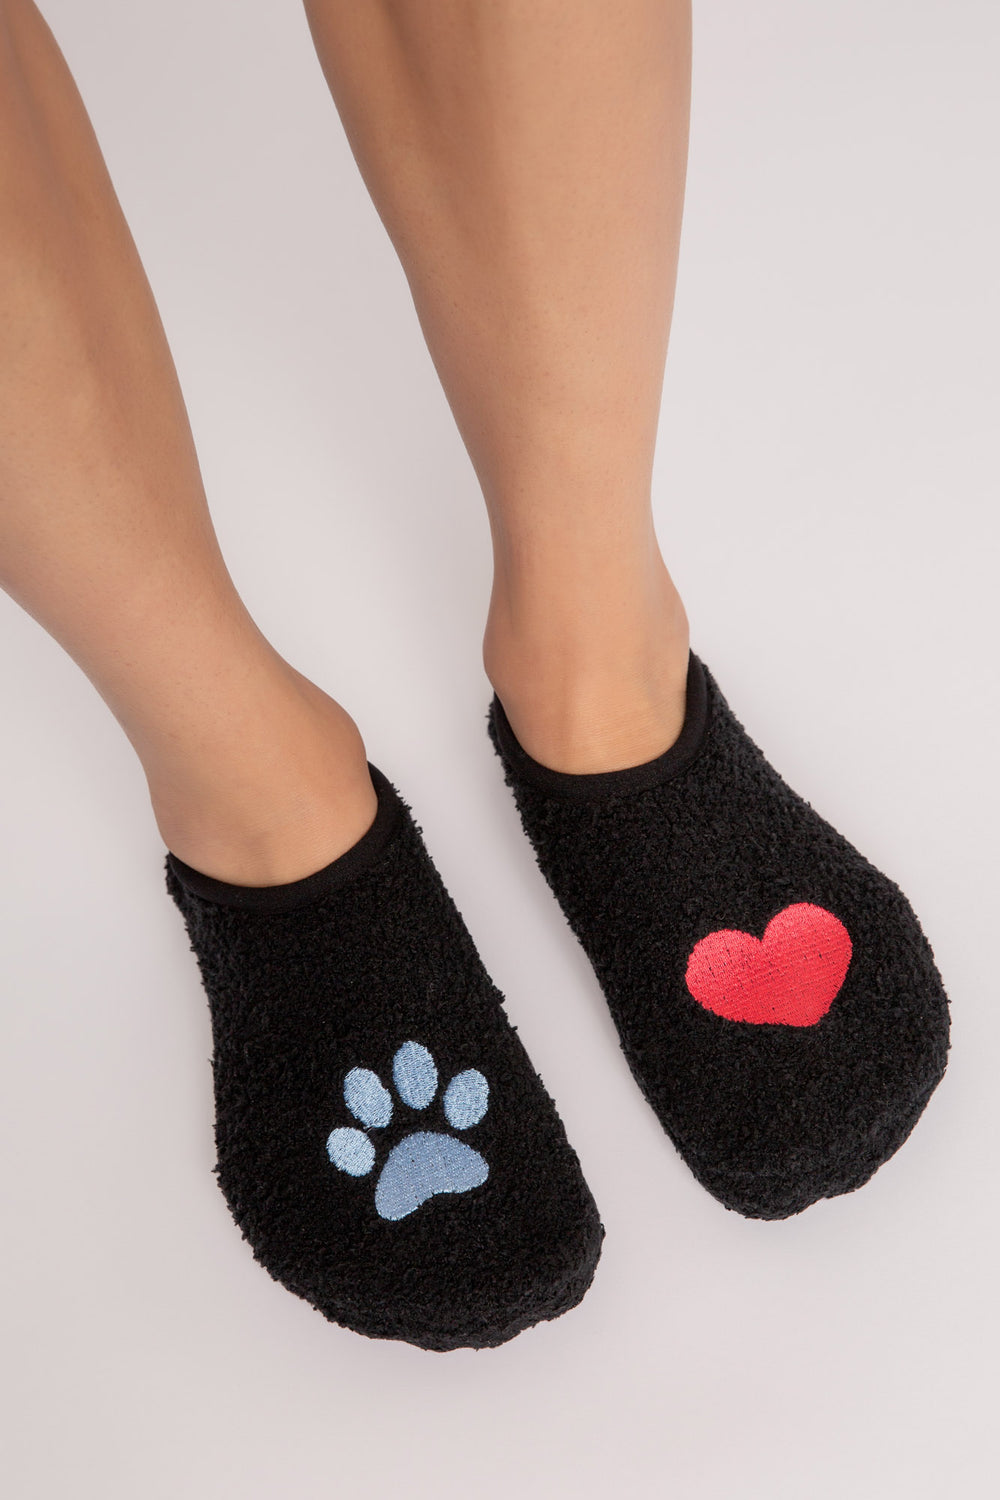 Black cozy slipper-sock with dog paw & heart design on toes. Clear-printed grippers on soles. (6589295624292)